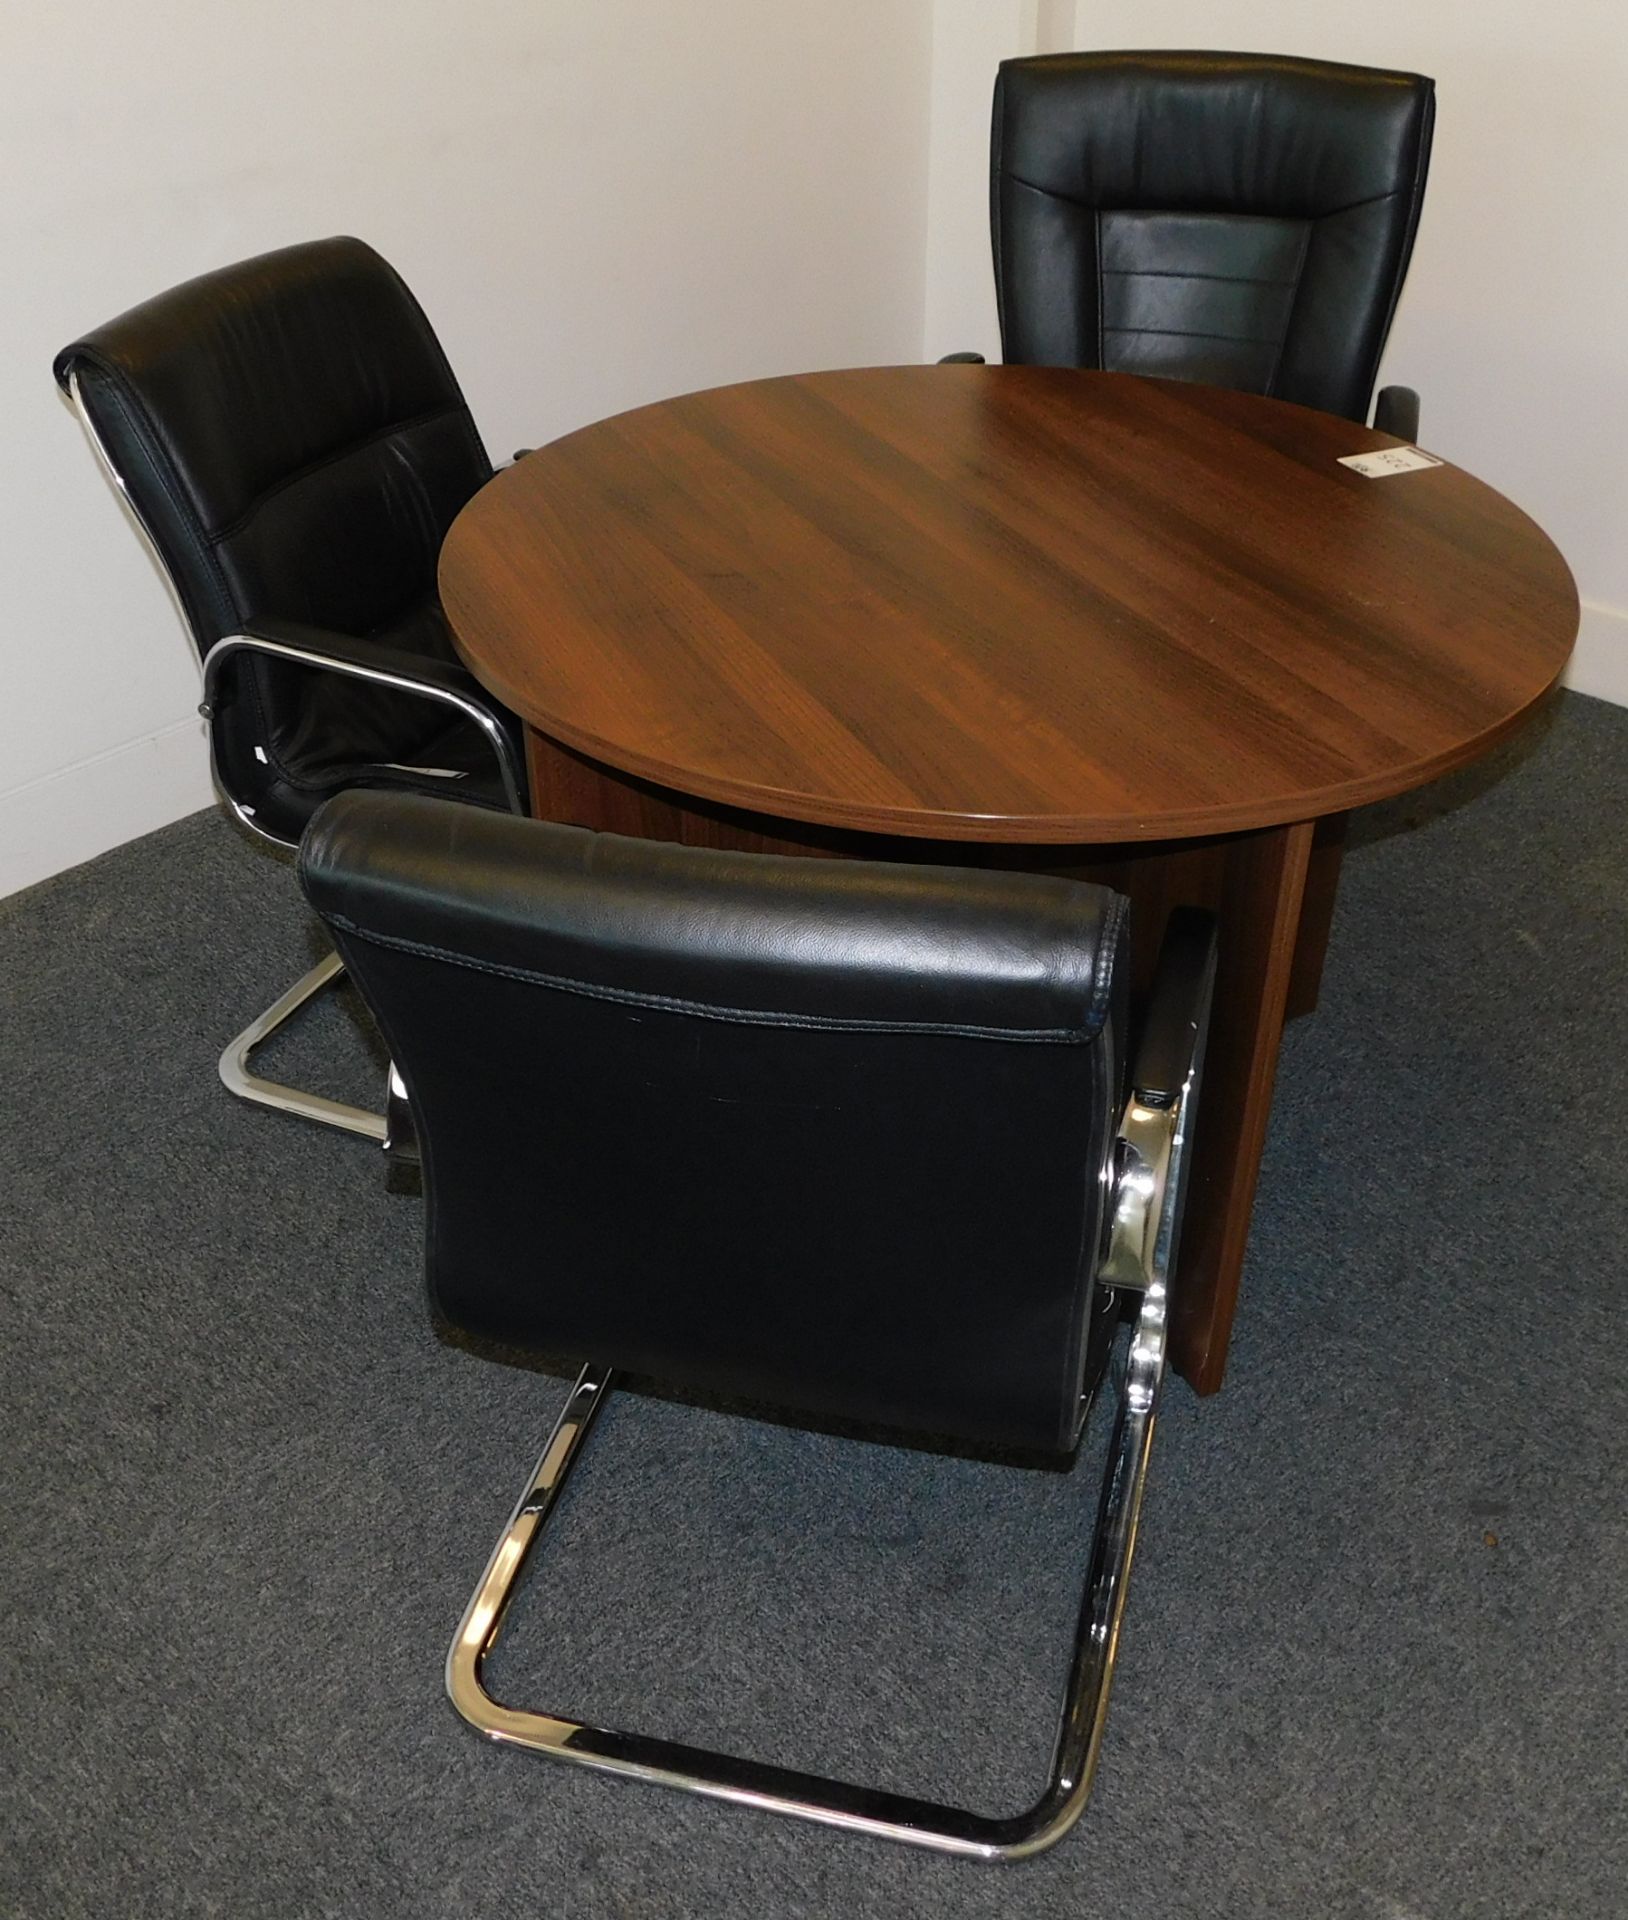 American Walnut Effect Meeting Table 110cm dia, with 3 Leather Effect Chrome Framed Cantilever - Image 2 of 2